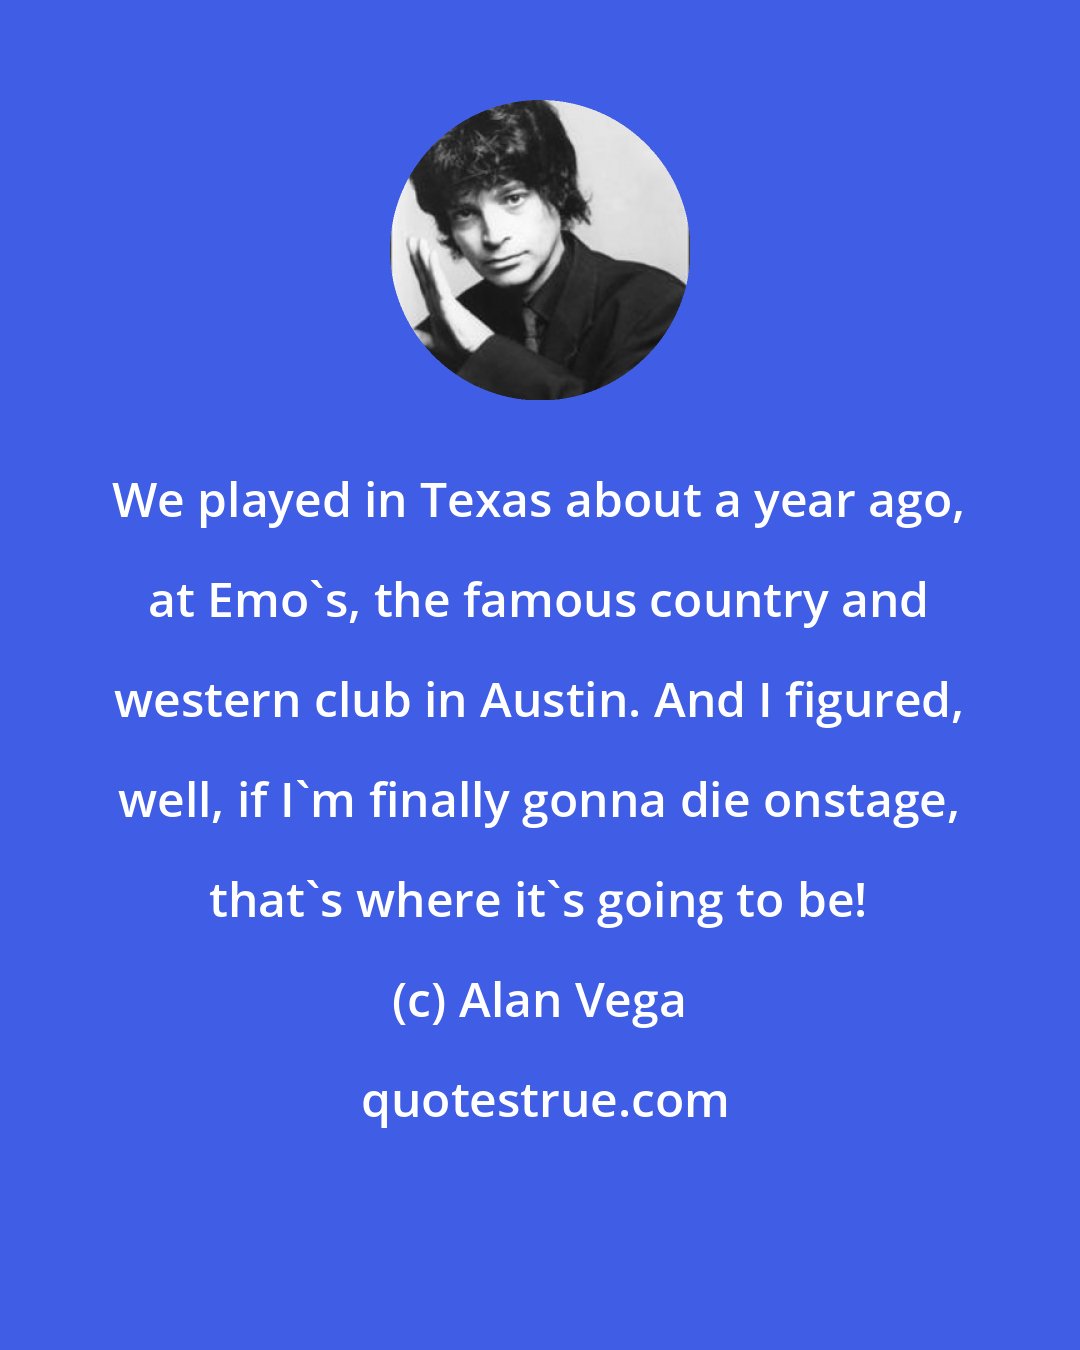 Alan Vega: We played in Texas about a year ago, at Emo's, the famous country and western club in Austin. And I figured, well, if I'm finally gonna die onstage, that's where it's going to be!